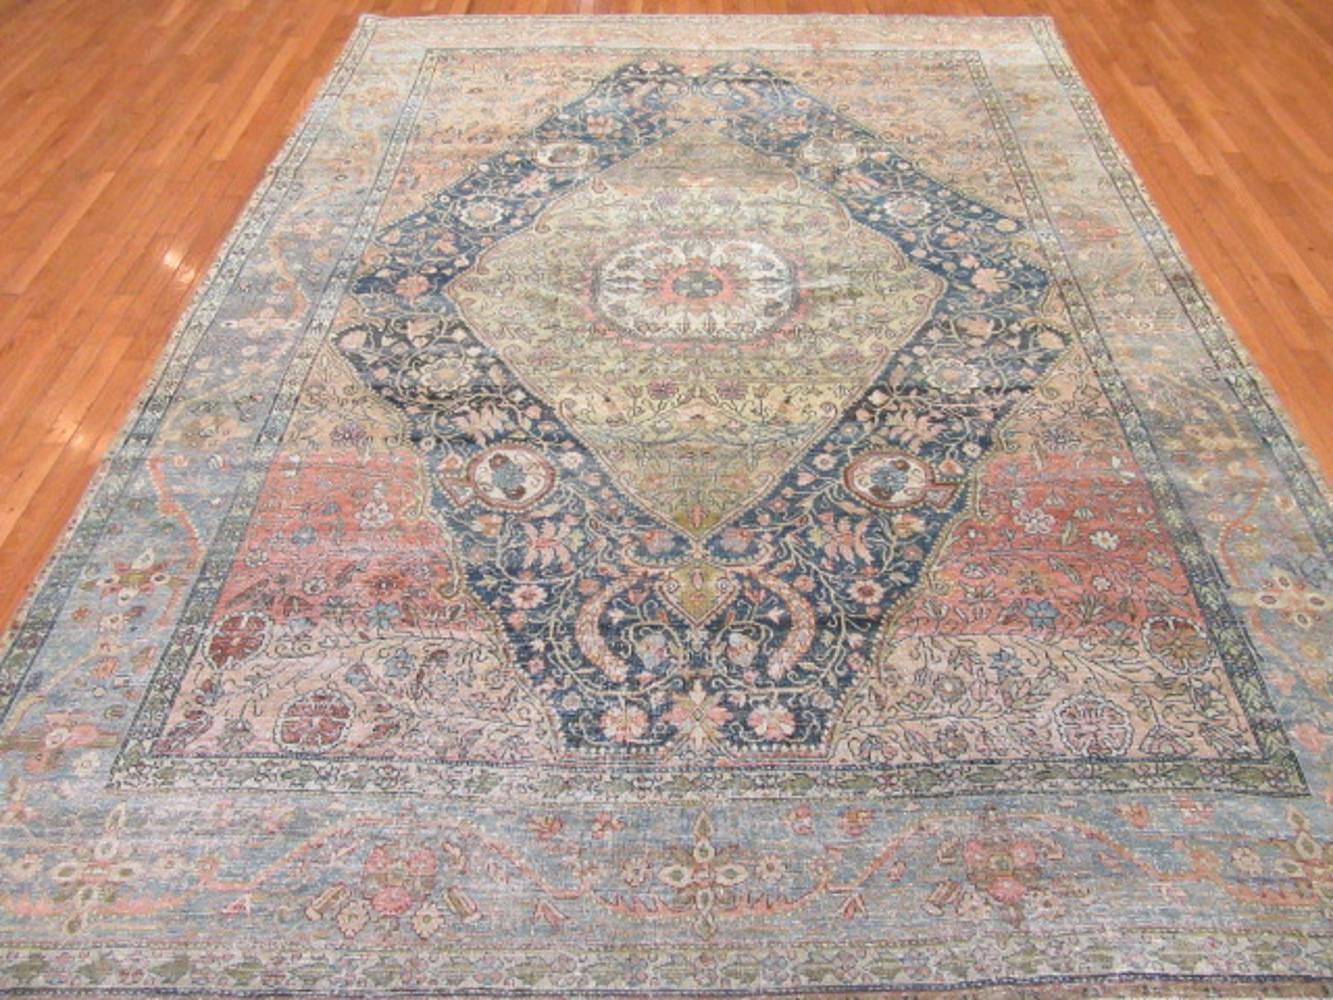 This is a beautiful and unique antique hand-knotted Persian Sarouk Farahan rug with a softer color combination not found in these type of rugs very much. It would enhance the look of any room. It measures 8' x 10' 7’’. It is in great condition and